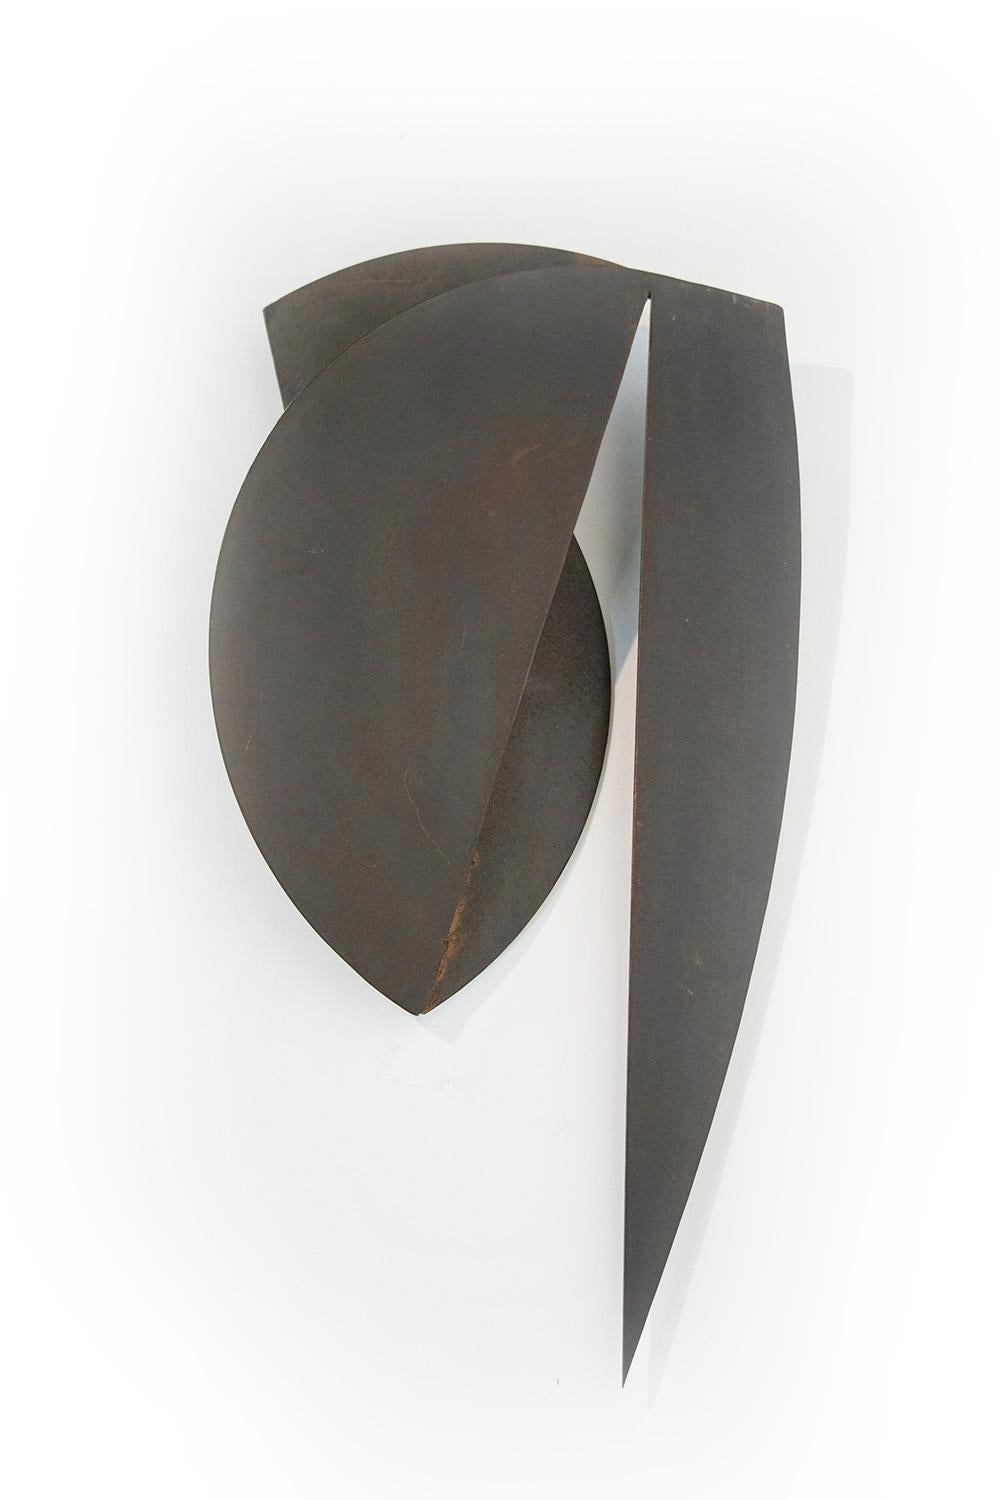 Joe Wheaton Abstract Sculpture - DNA #2: Contemporary Black Abstract Oxidized Steel Wall Sculpture